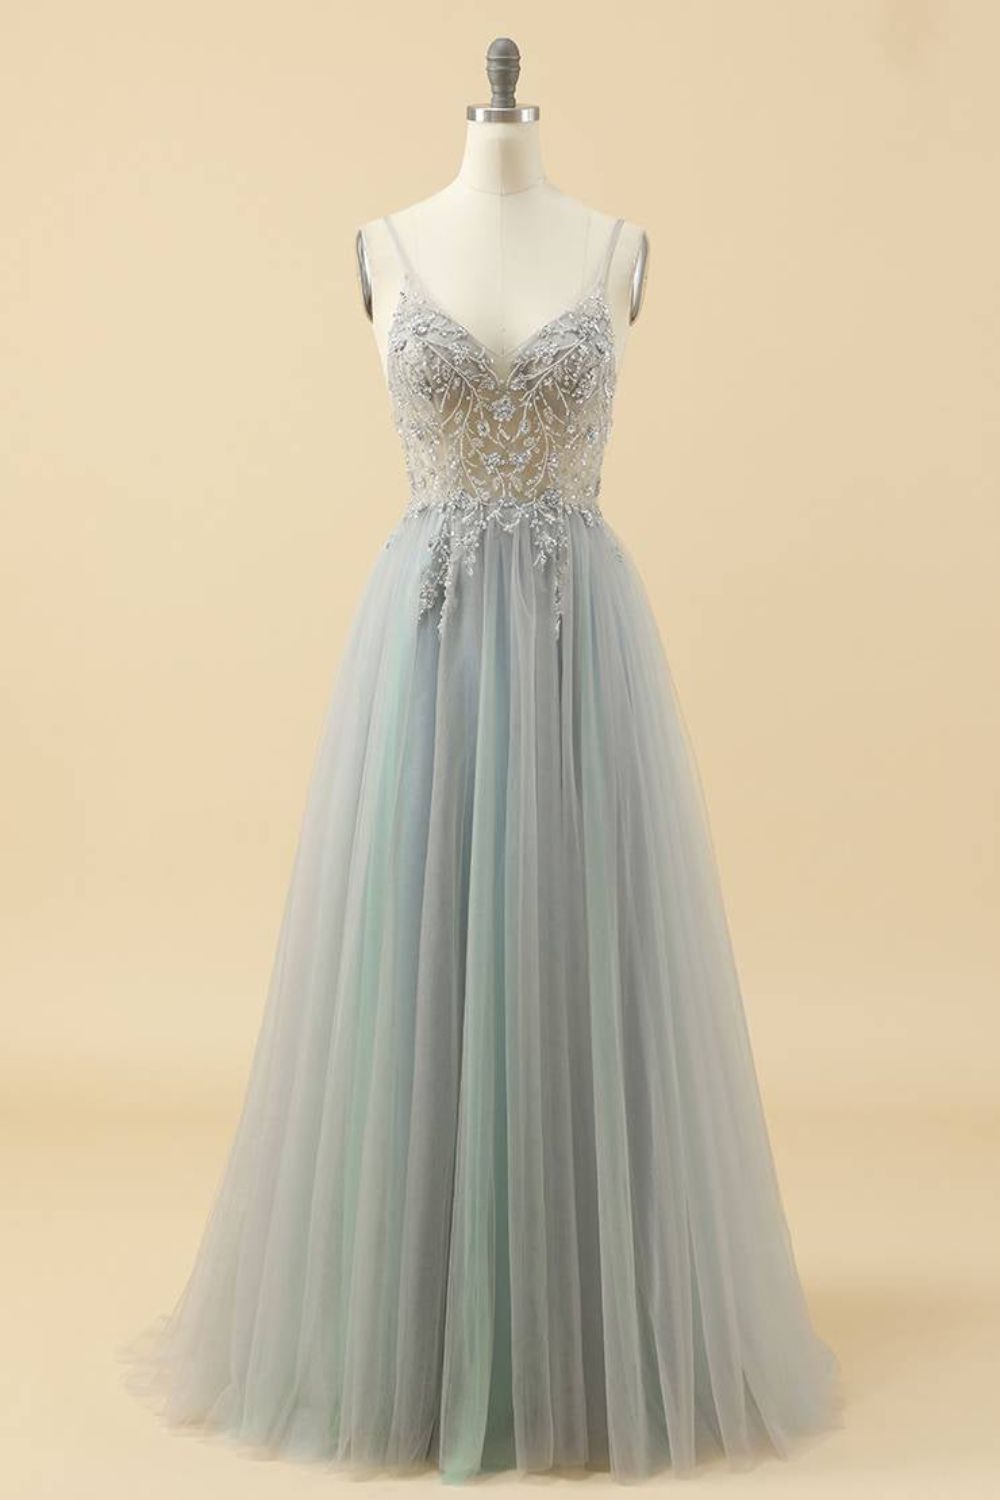 Dressime A Line Spaghetti Straps V Neck Tulle Prom Dress With Beads